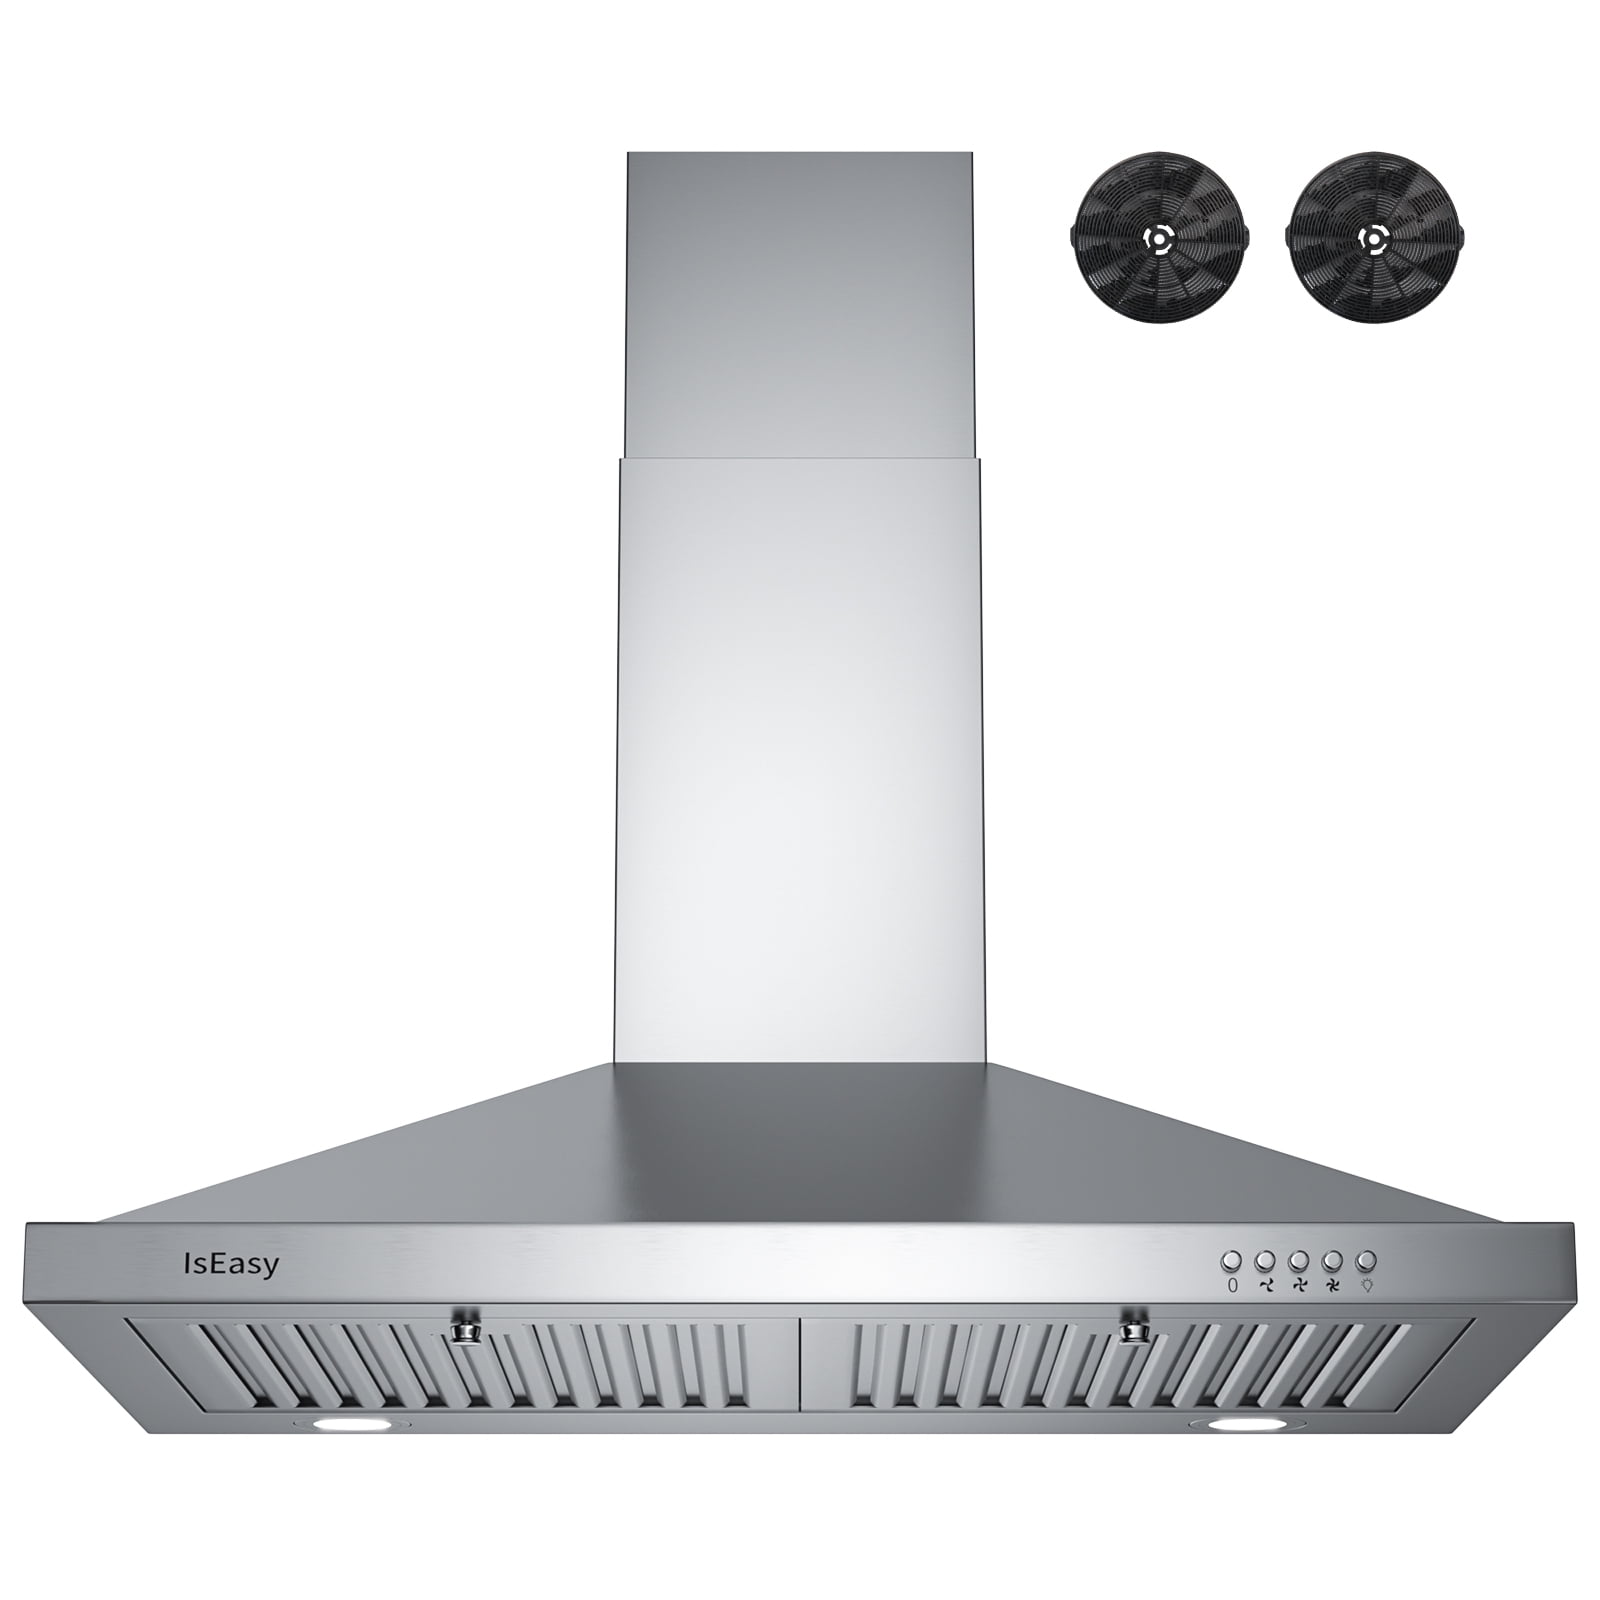 FIREGAS Range Hood 30 inch Under Cabinet Range Hood with 2 Speed Exhaust  Fan,Ducted/Ductless Convertible,Rocker Button Control,300 CFM, White Vent